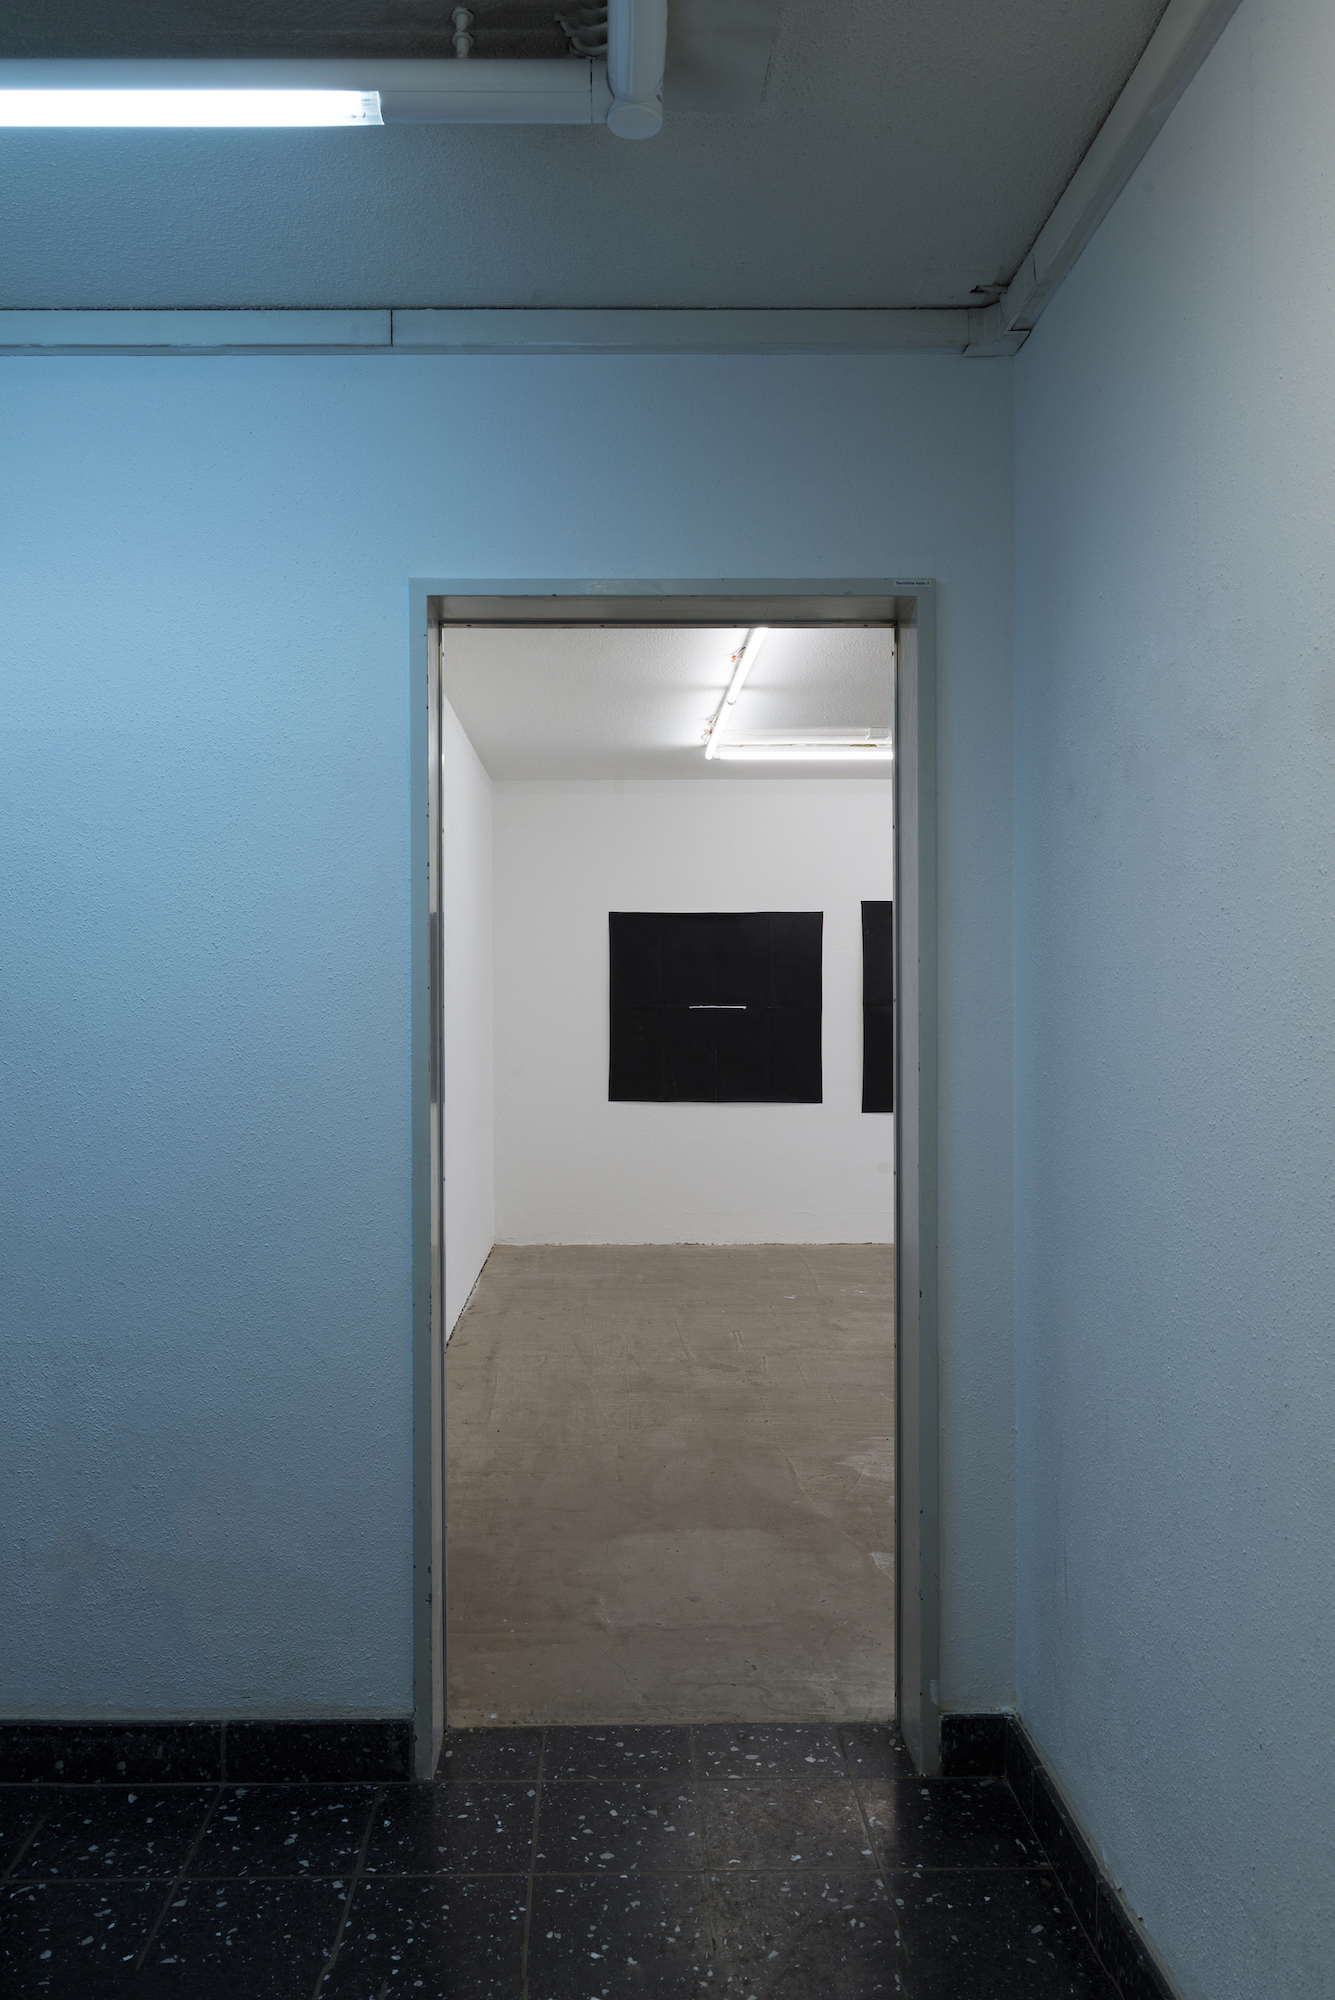 Installation view of Â«Stop thinking about foreverÂ» at Hamlet 